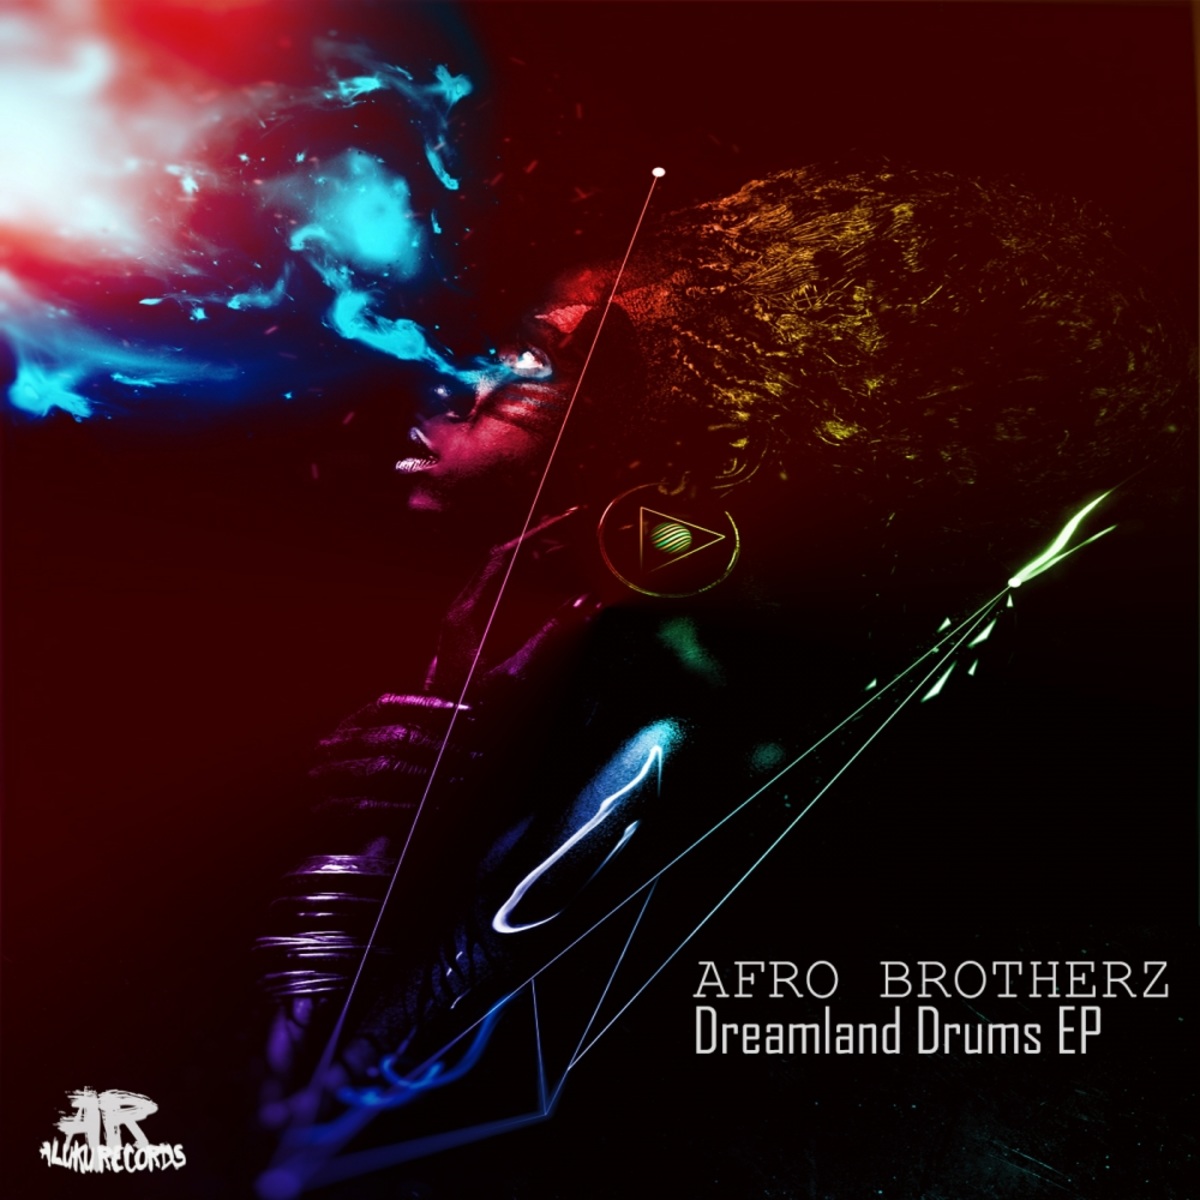 Afro Brotherz - Dreamland Drums / Aluku Records